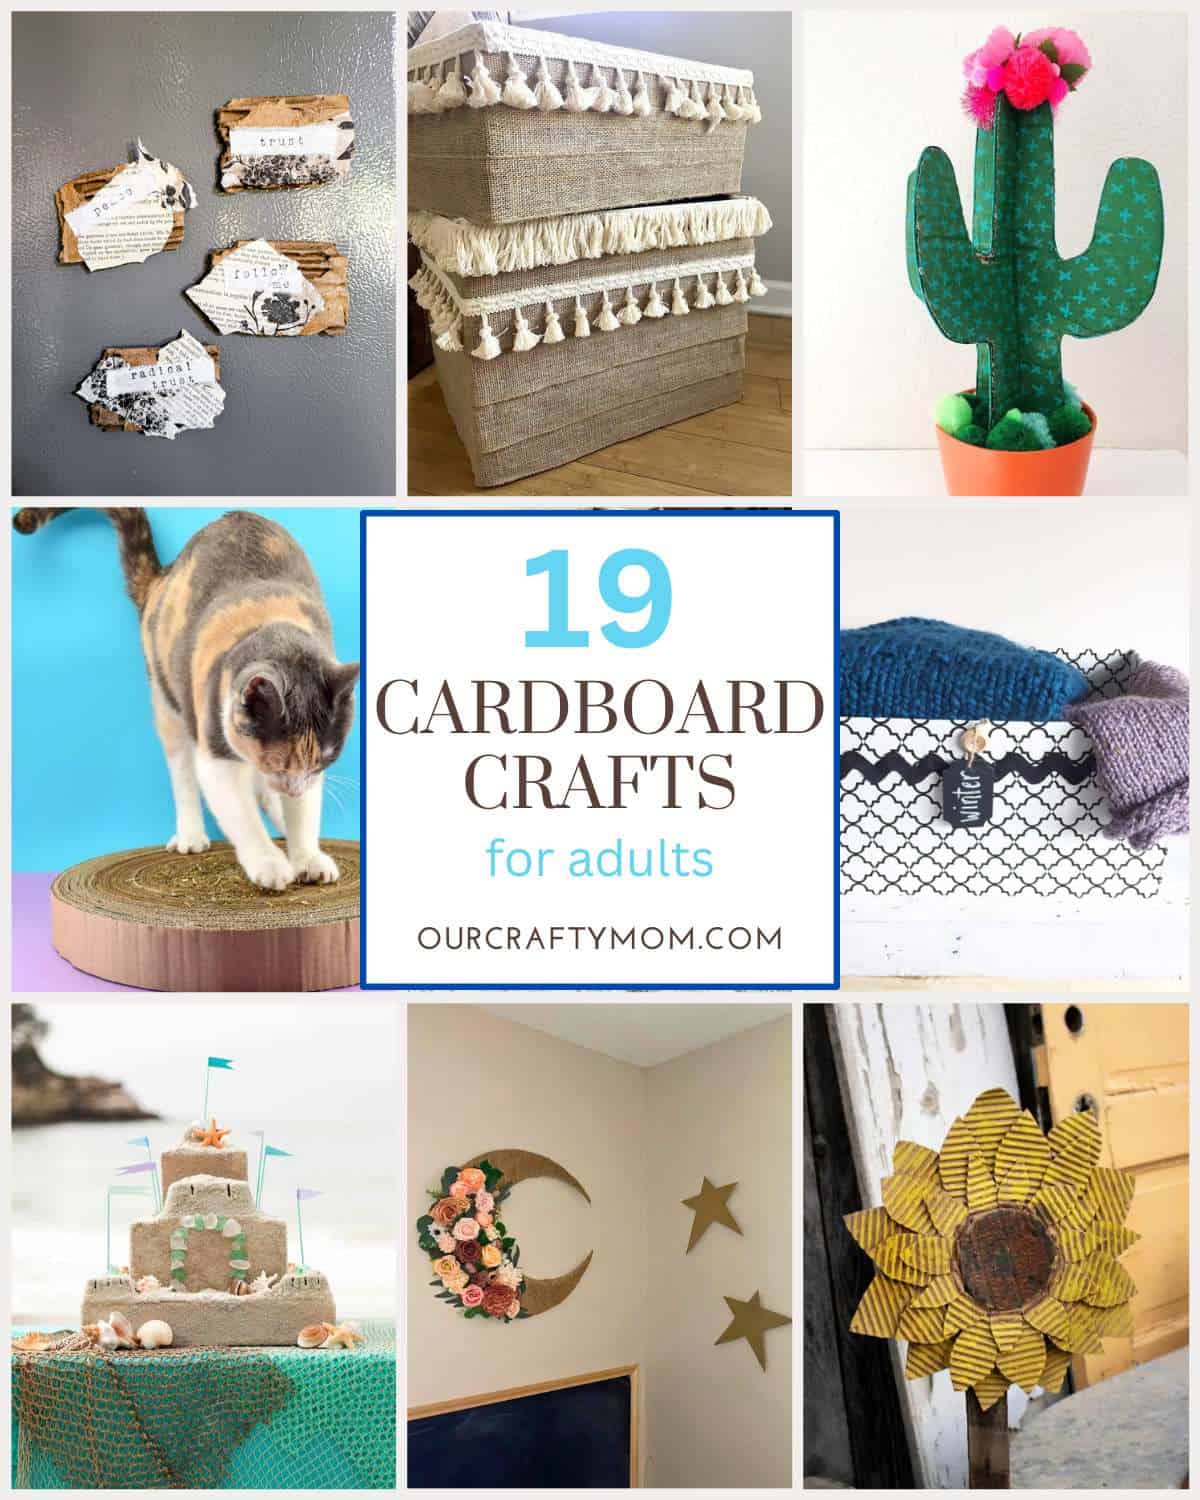 cardboard crafts for adults feature collage